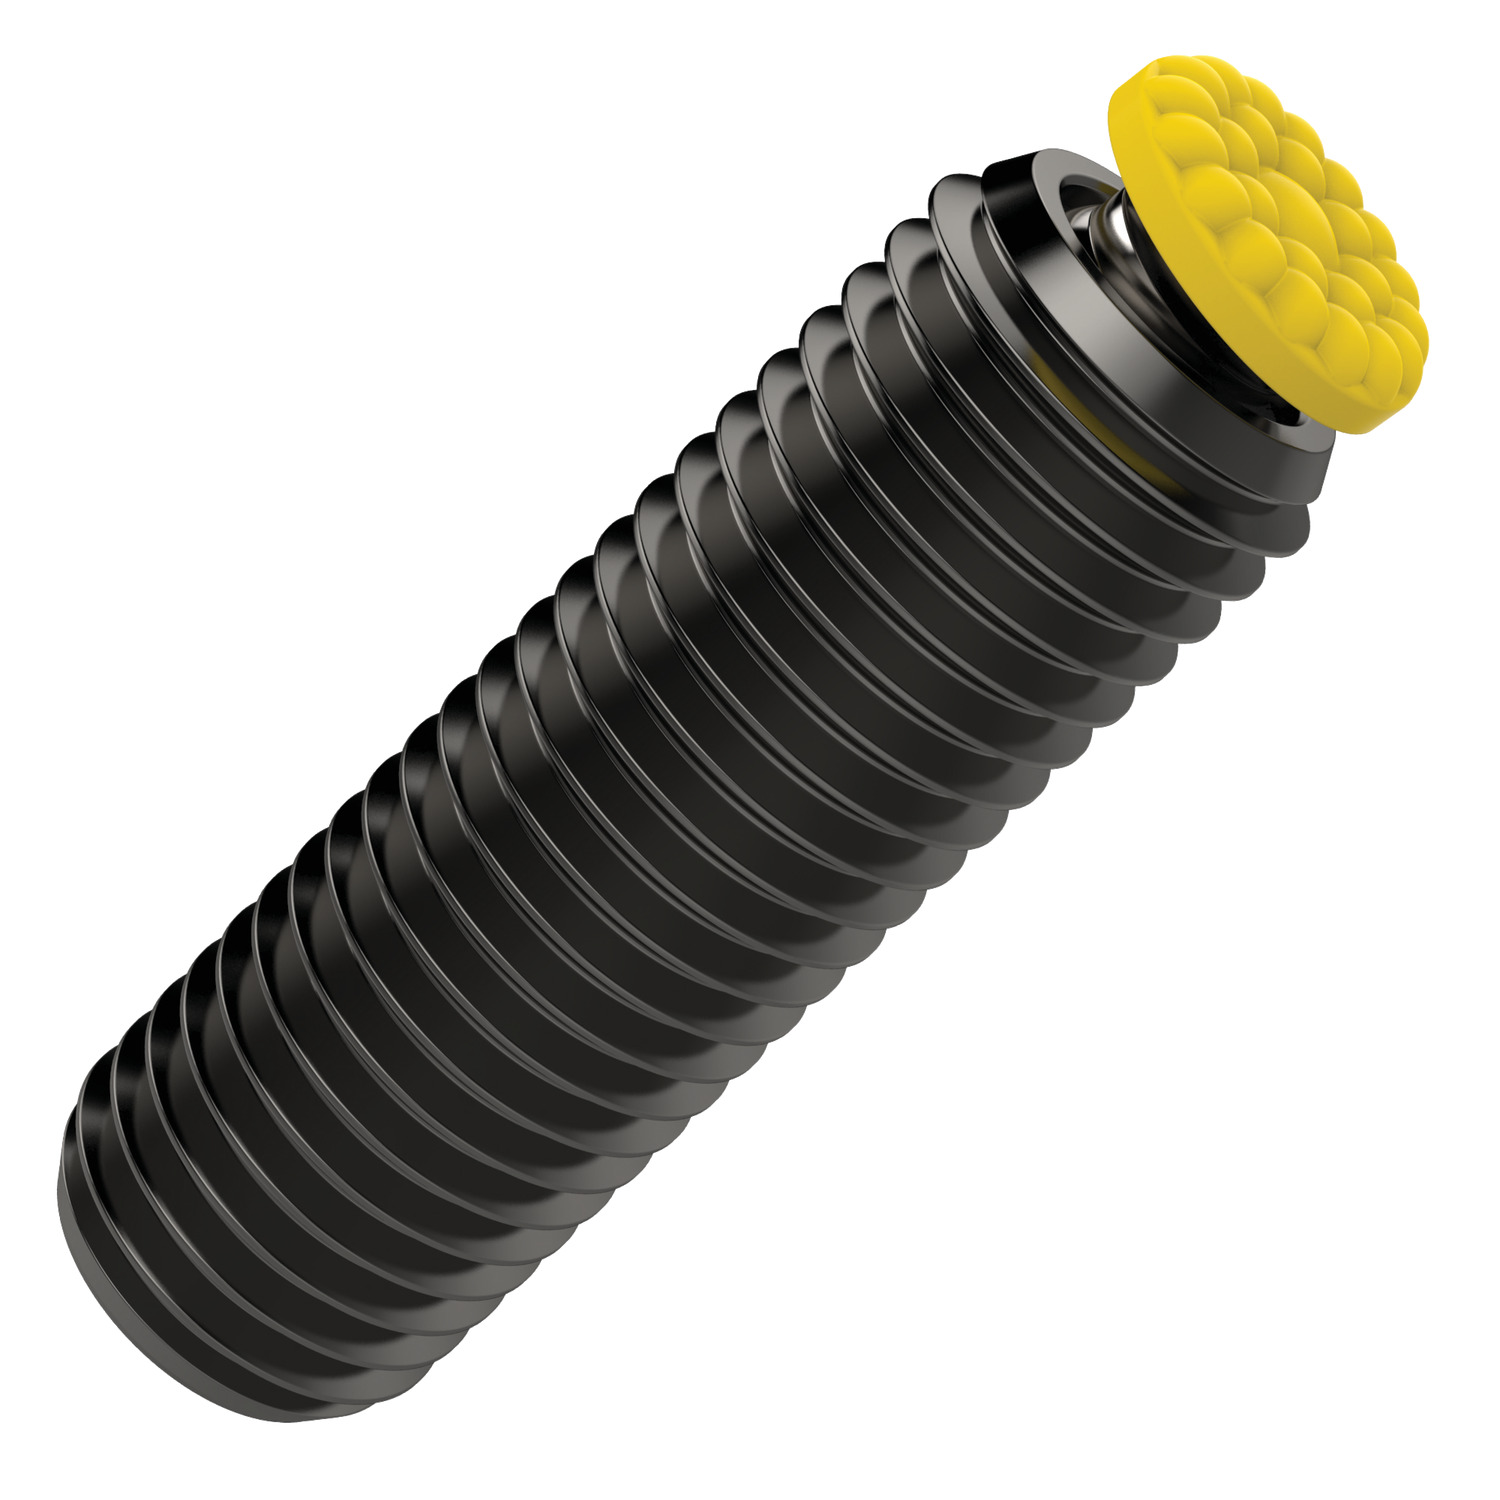 Product 35624, Grippers - Self Aligning set screw - urethane coated / 